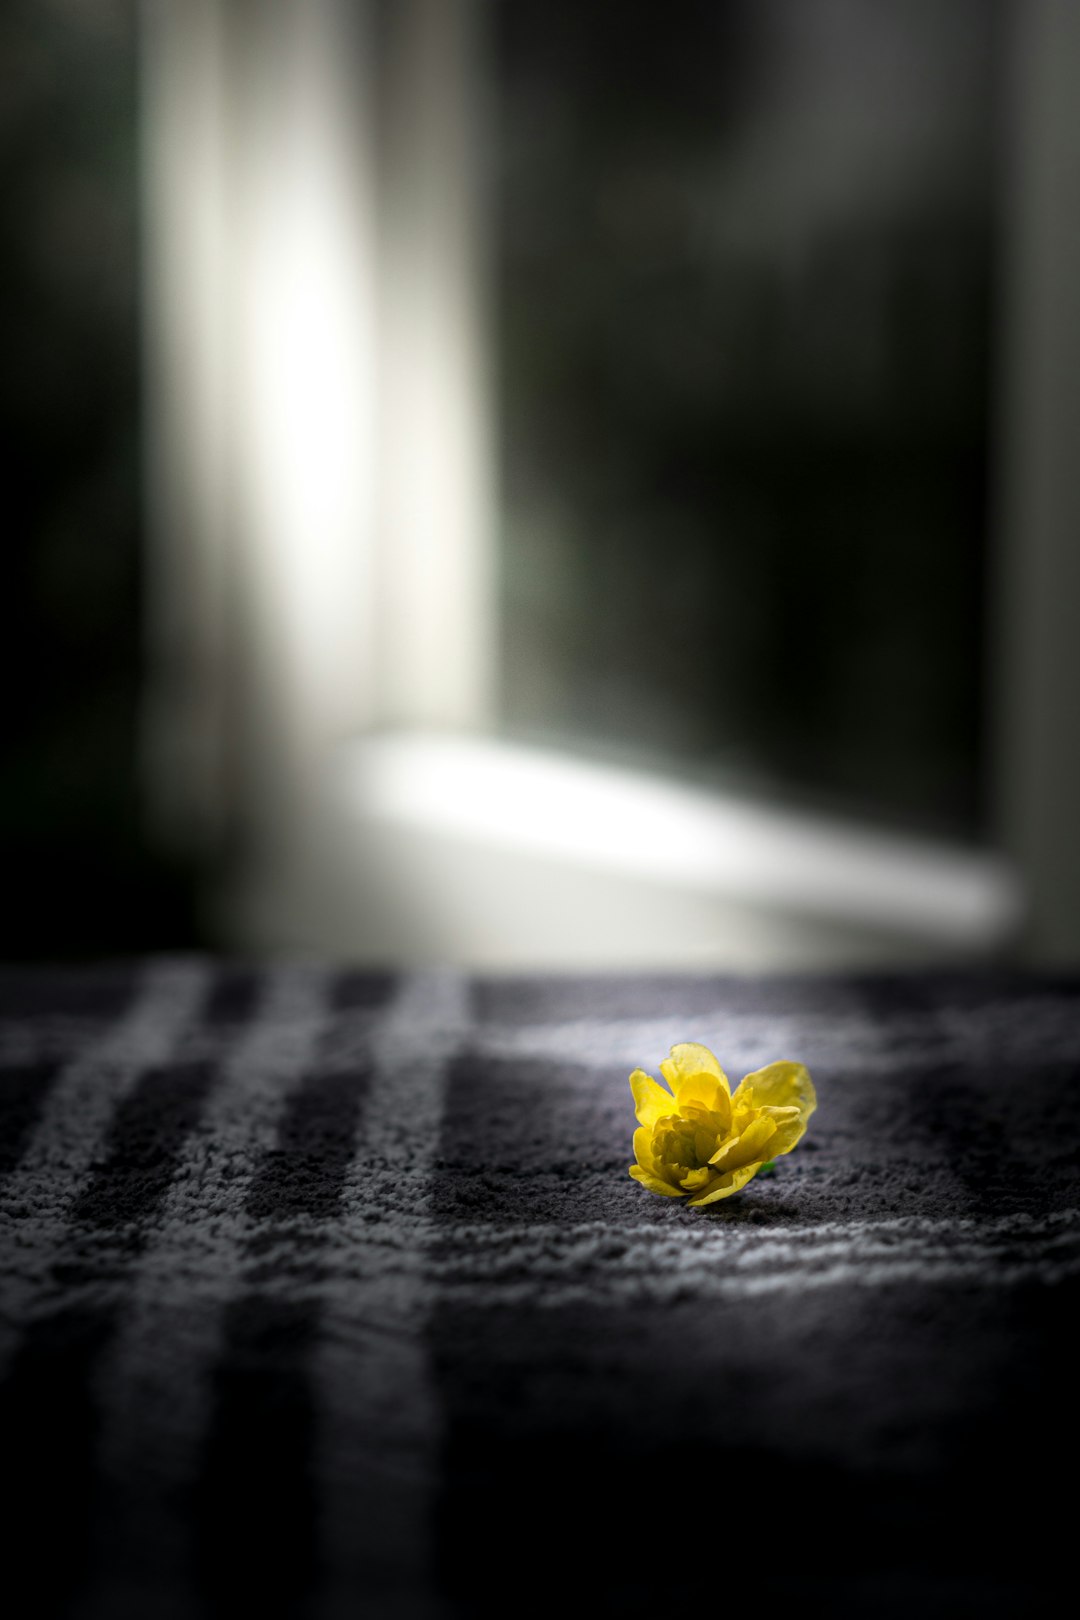 yellow flower on black and white checkered textile